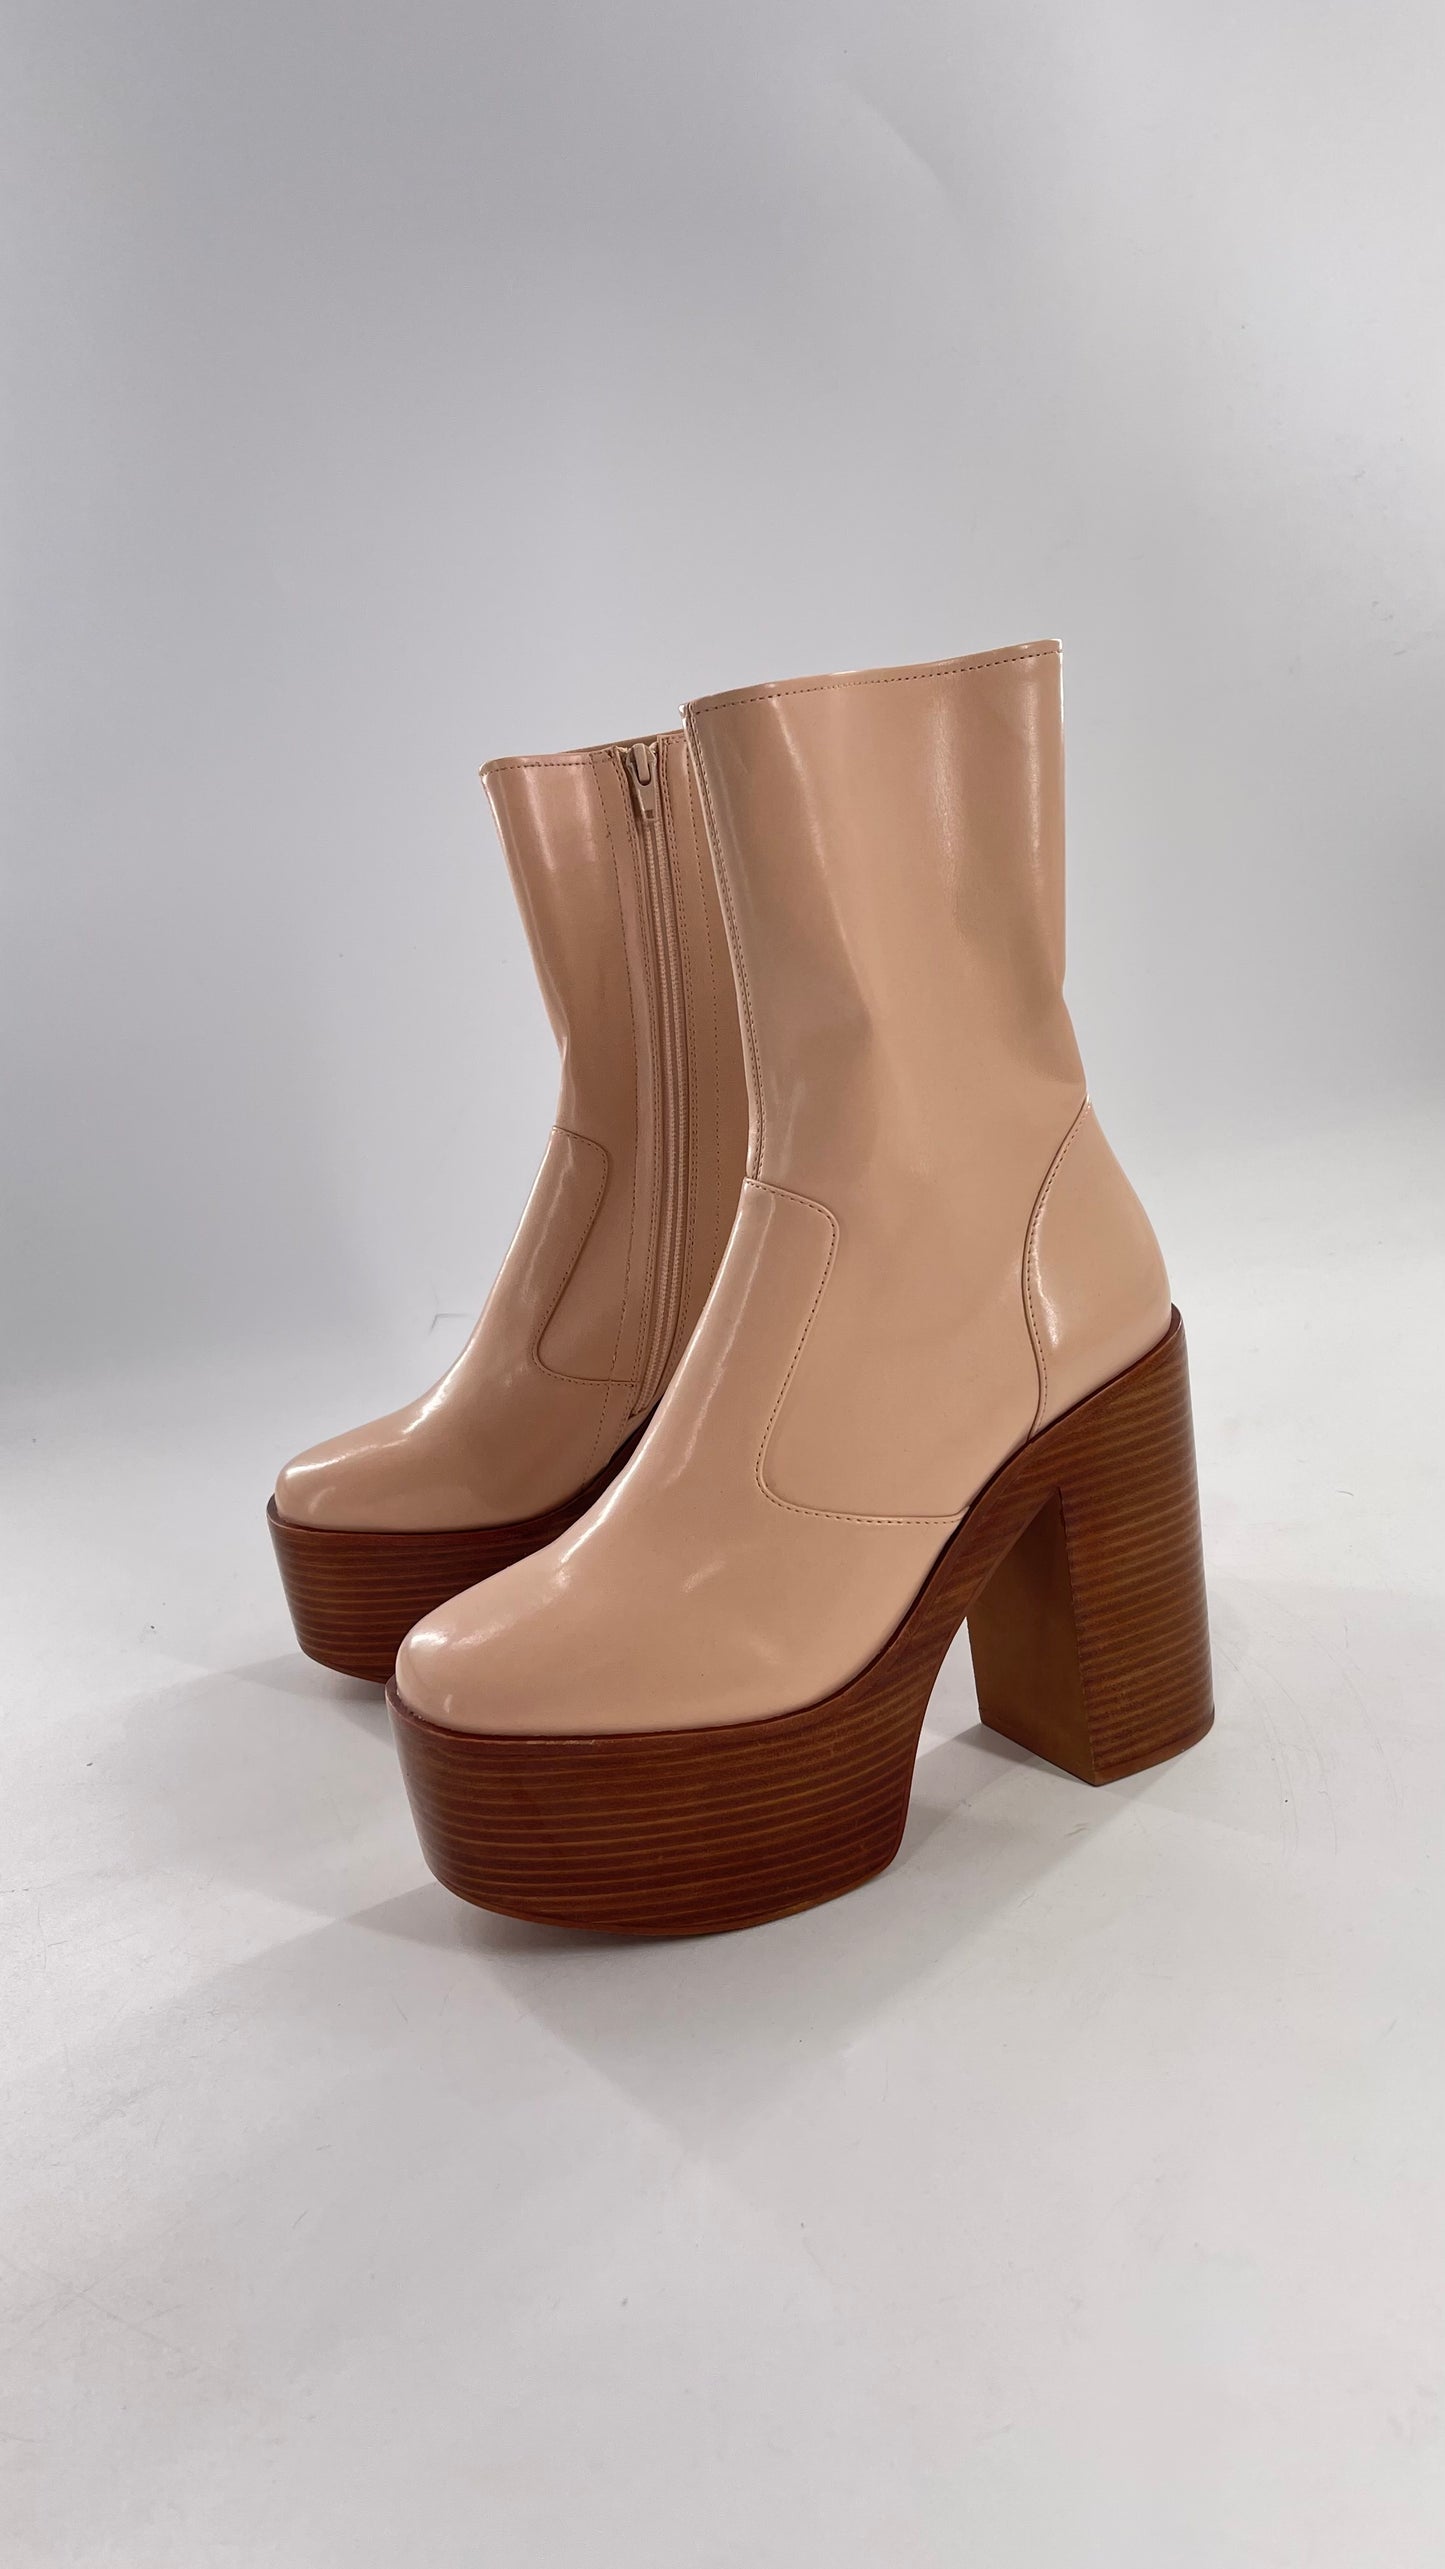 Free People X Jeffrey Campbell Mexique GoGo Boots • Beige Patent Boot with Wood Grain Chunky Block Heel and Platform  (9)